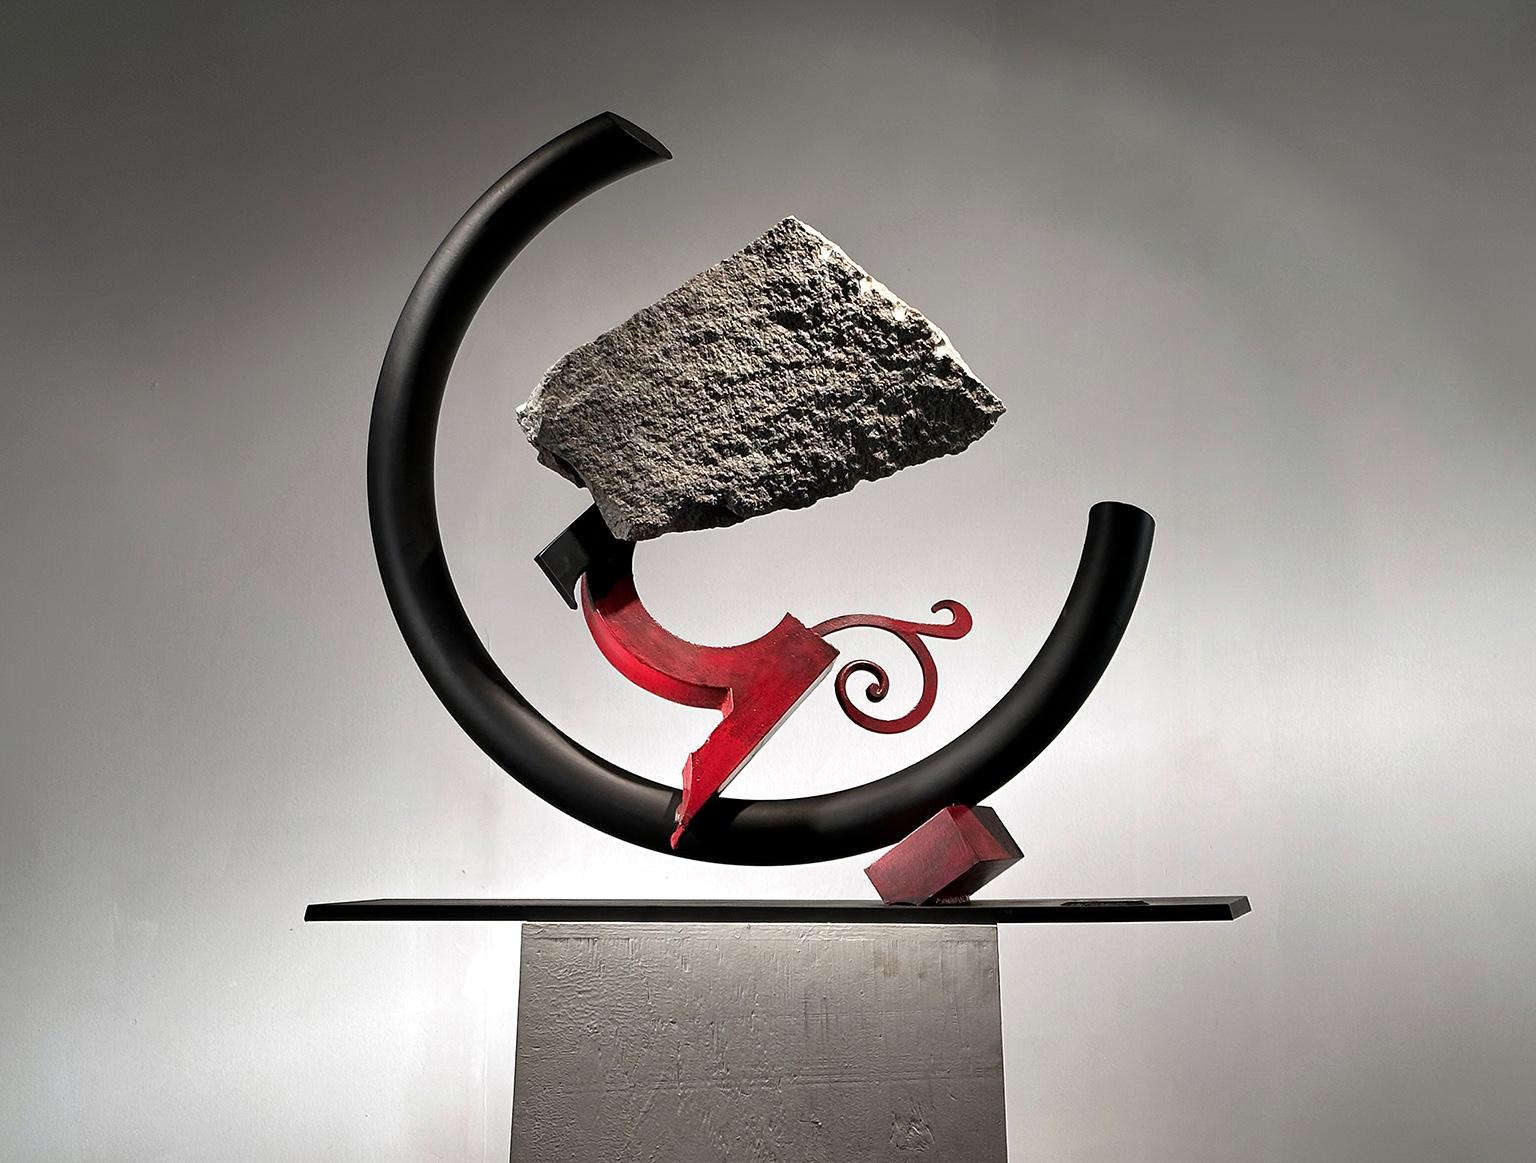 "Sisyphean Circle (twirl IV)" by John Van Alstine
Granite, galvanized and powder-coated steel

The sculpture of John Van Alstine beautifully, and powerfully, balances the union of stone and metal, while exploring the relationship of the purely